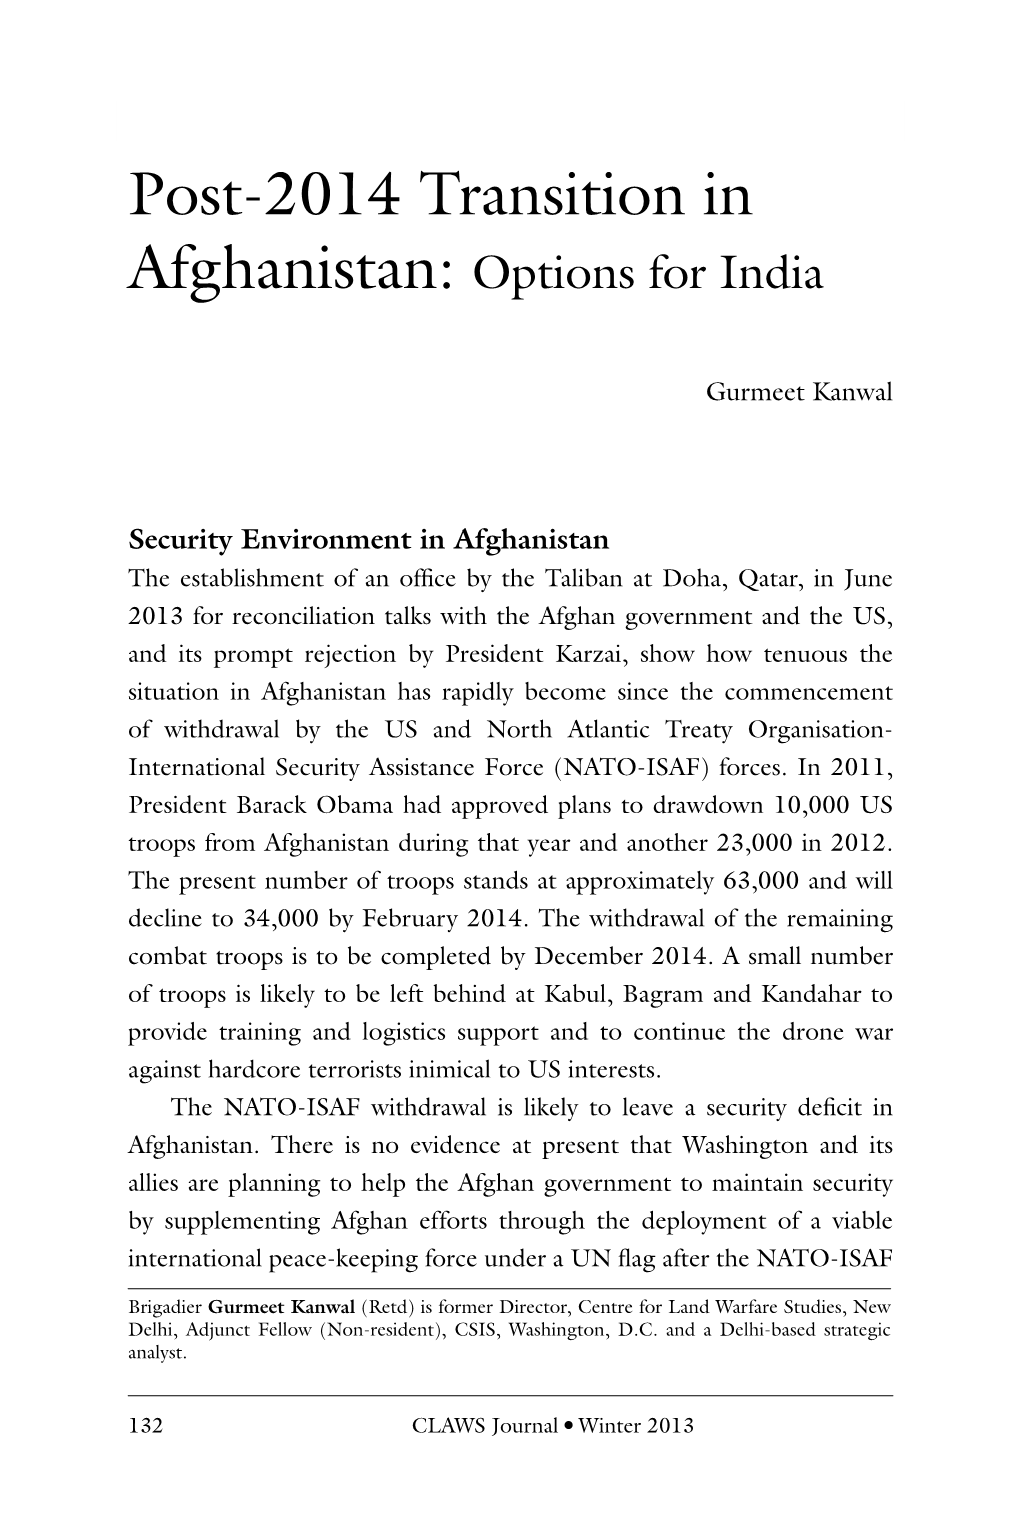 Post-2014 Transition in Afghanistan: Options for India